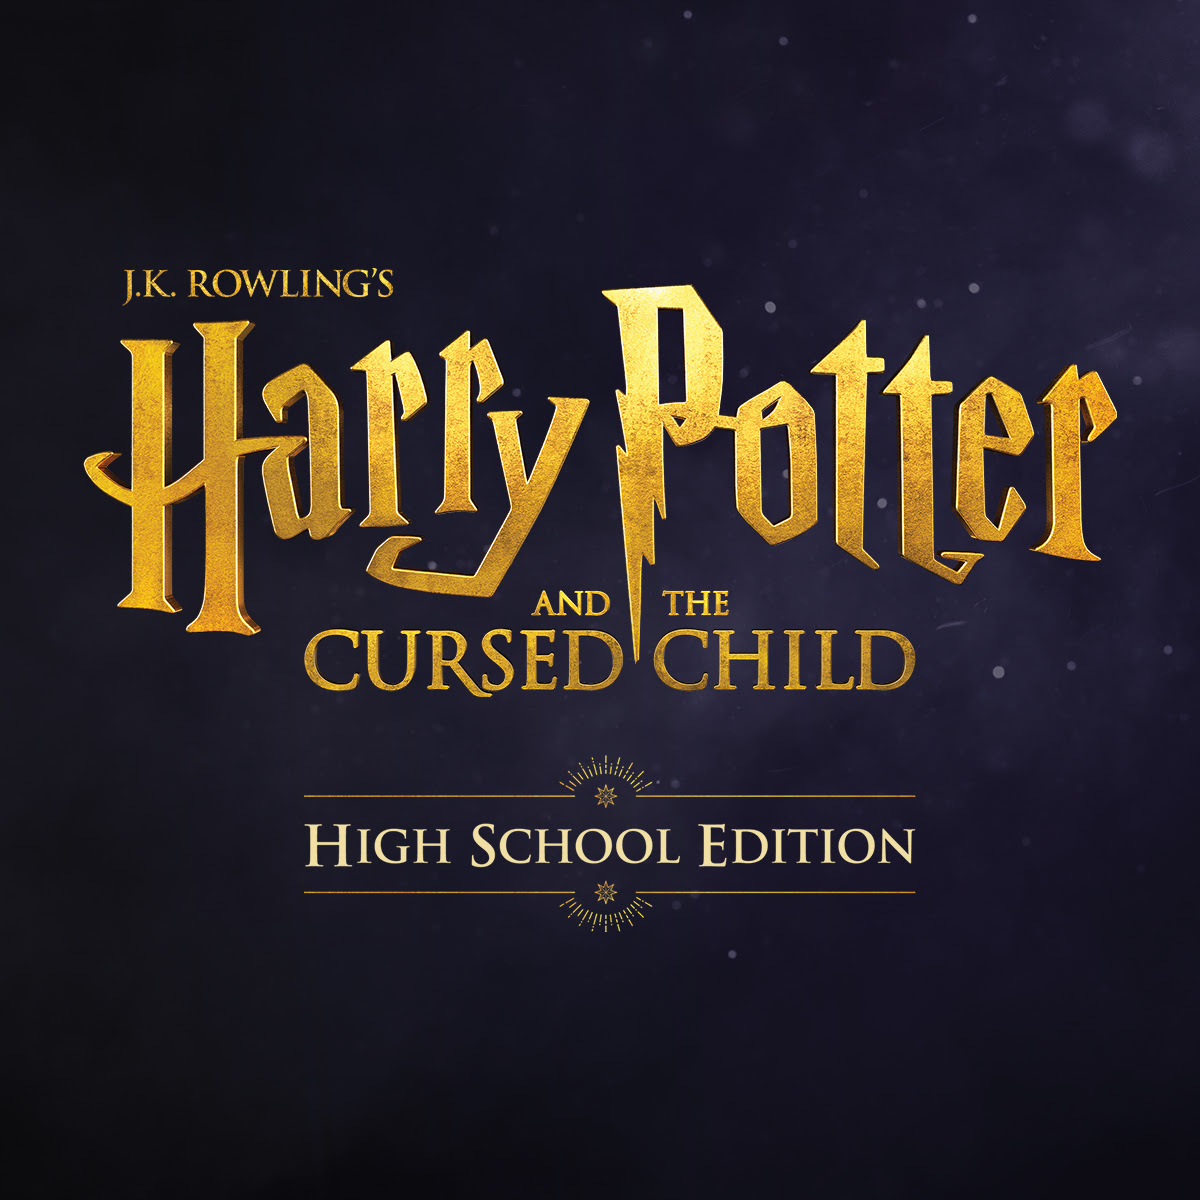 Wilton High School joins a small number of other high schools across the country to put on Harry Potter and the Cursed Child for the first time in secondary schools this fall.